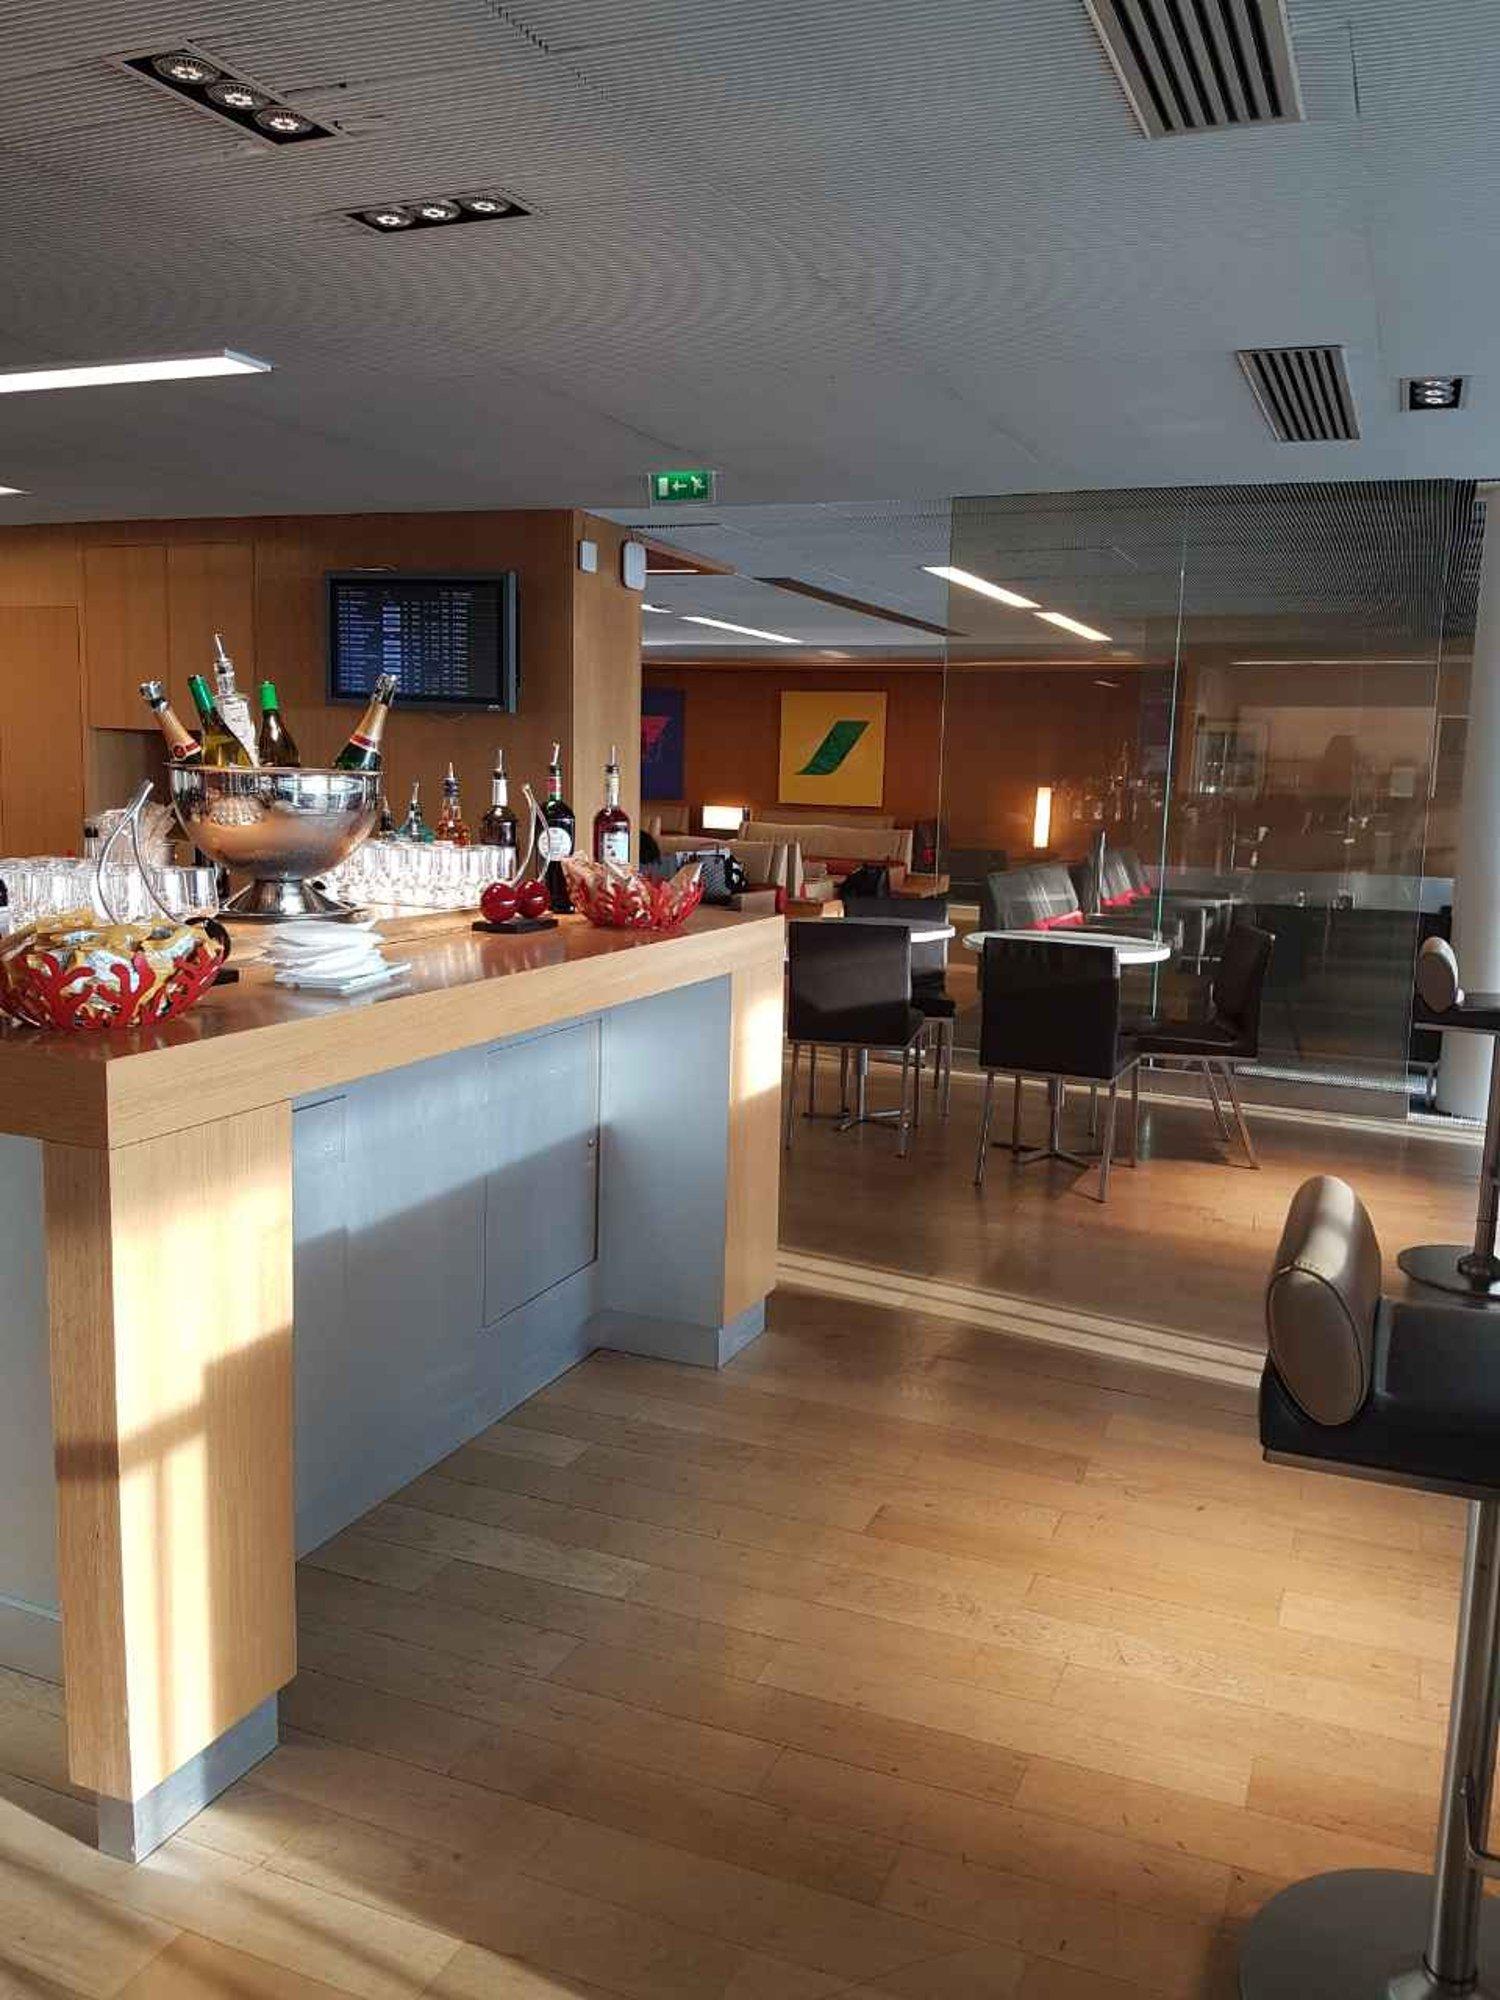 Air France Lounge (Concourse K) image 22 of 35